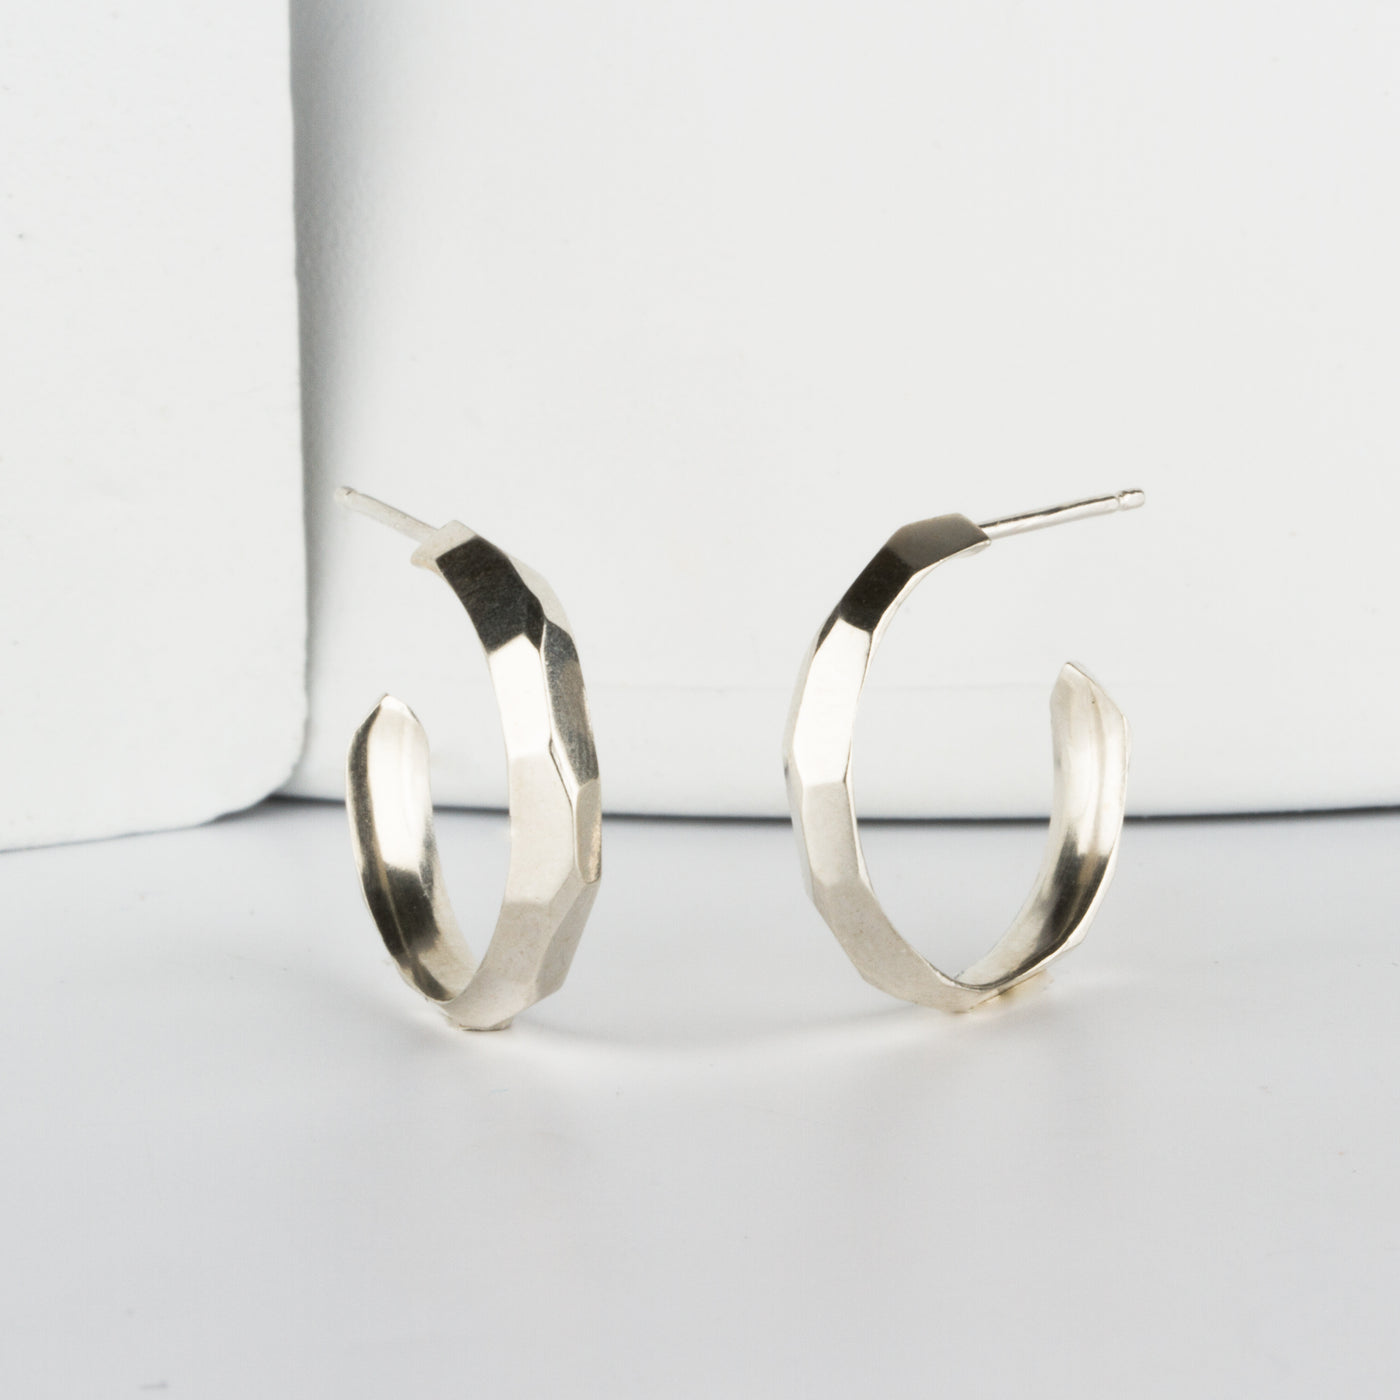 Sterling silver small faceted hoop earrings with posts by Corey Egan